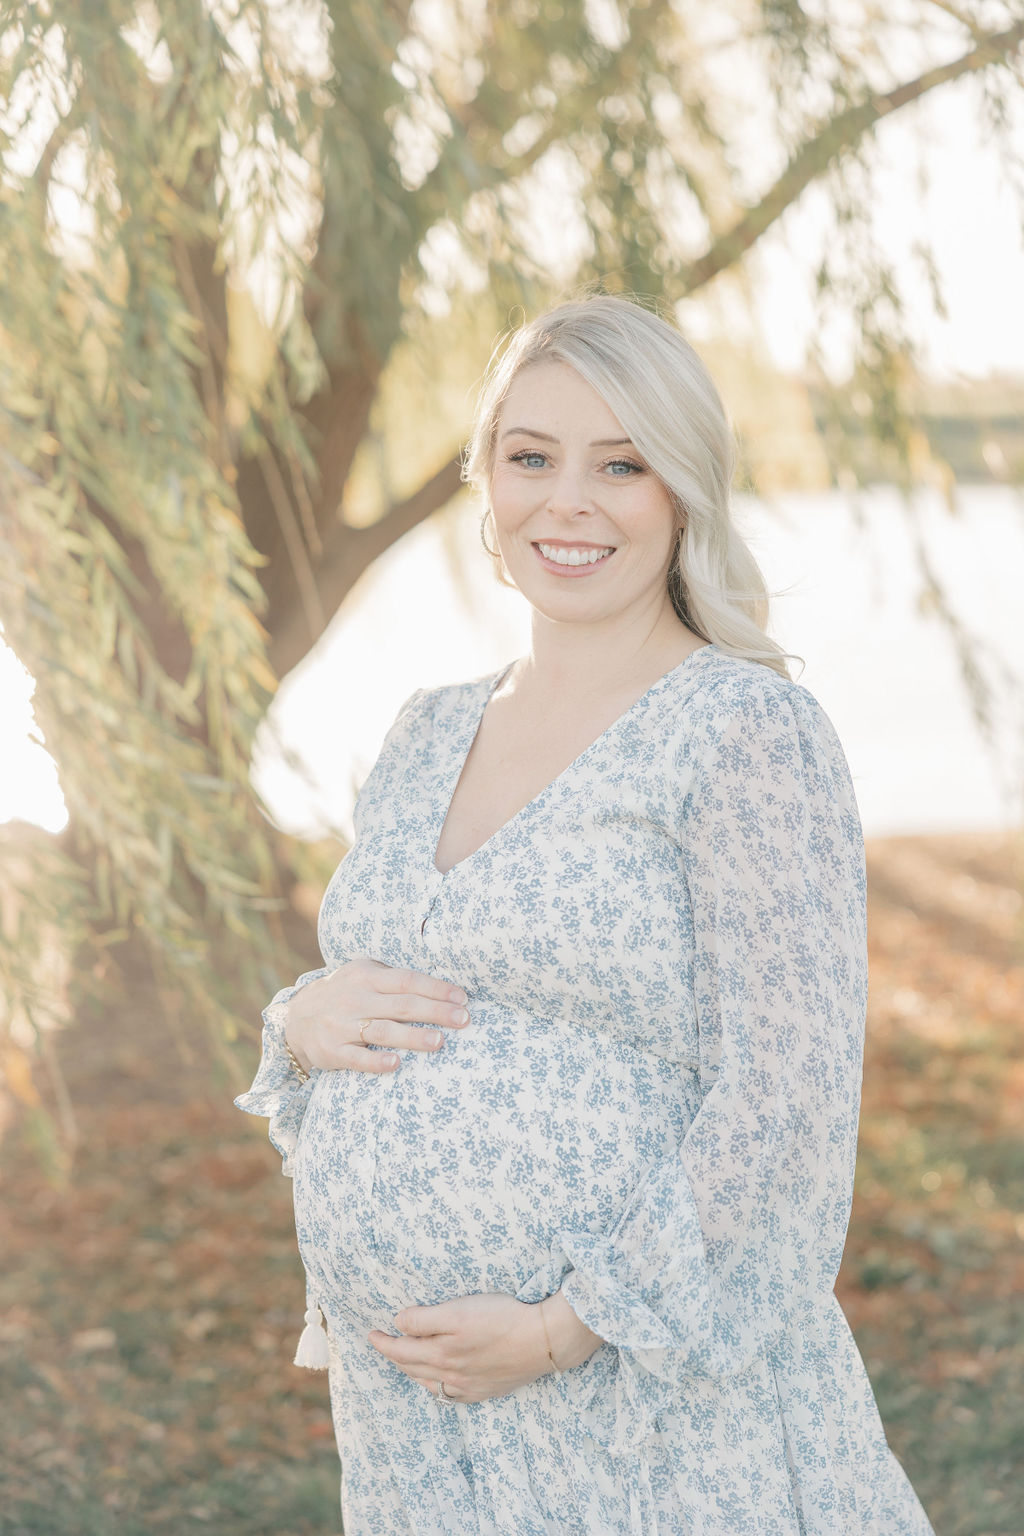 A mother to be in a blue floral dress stands smiling under a willow tree by a lake at sunset